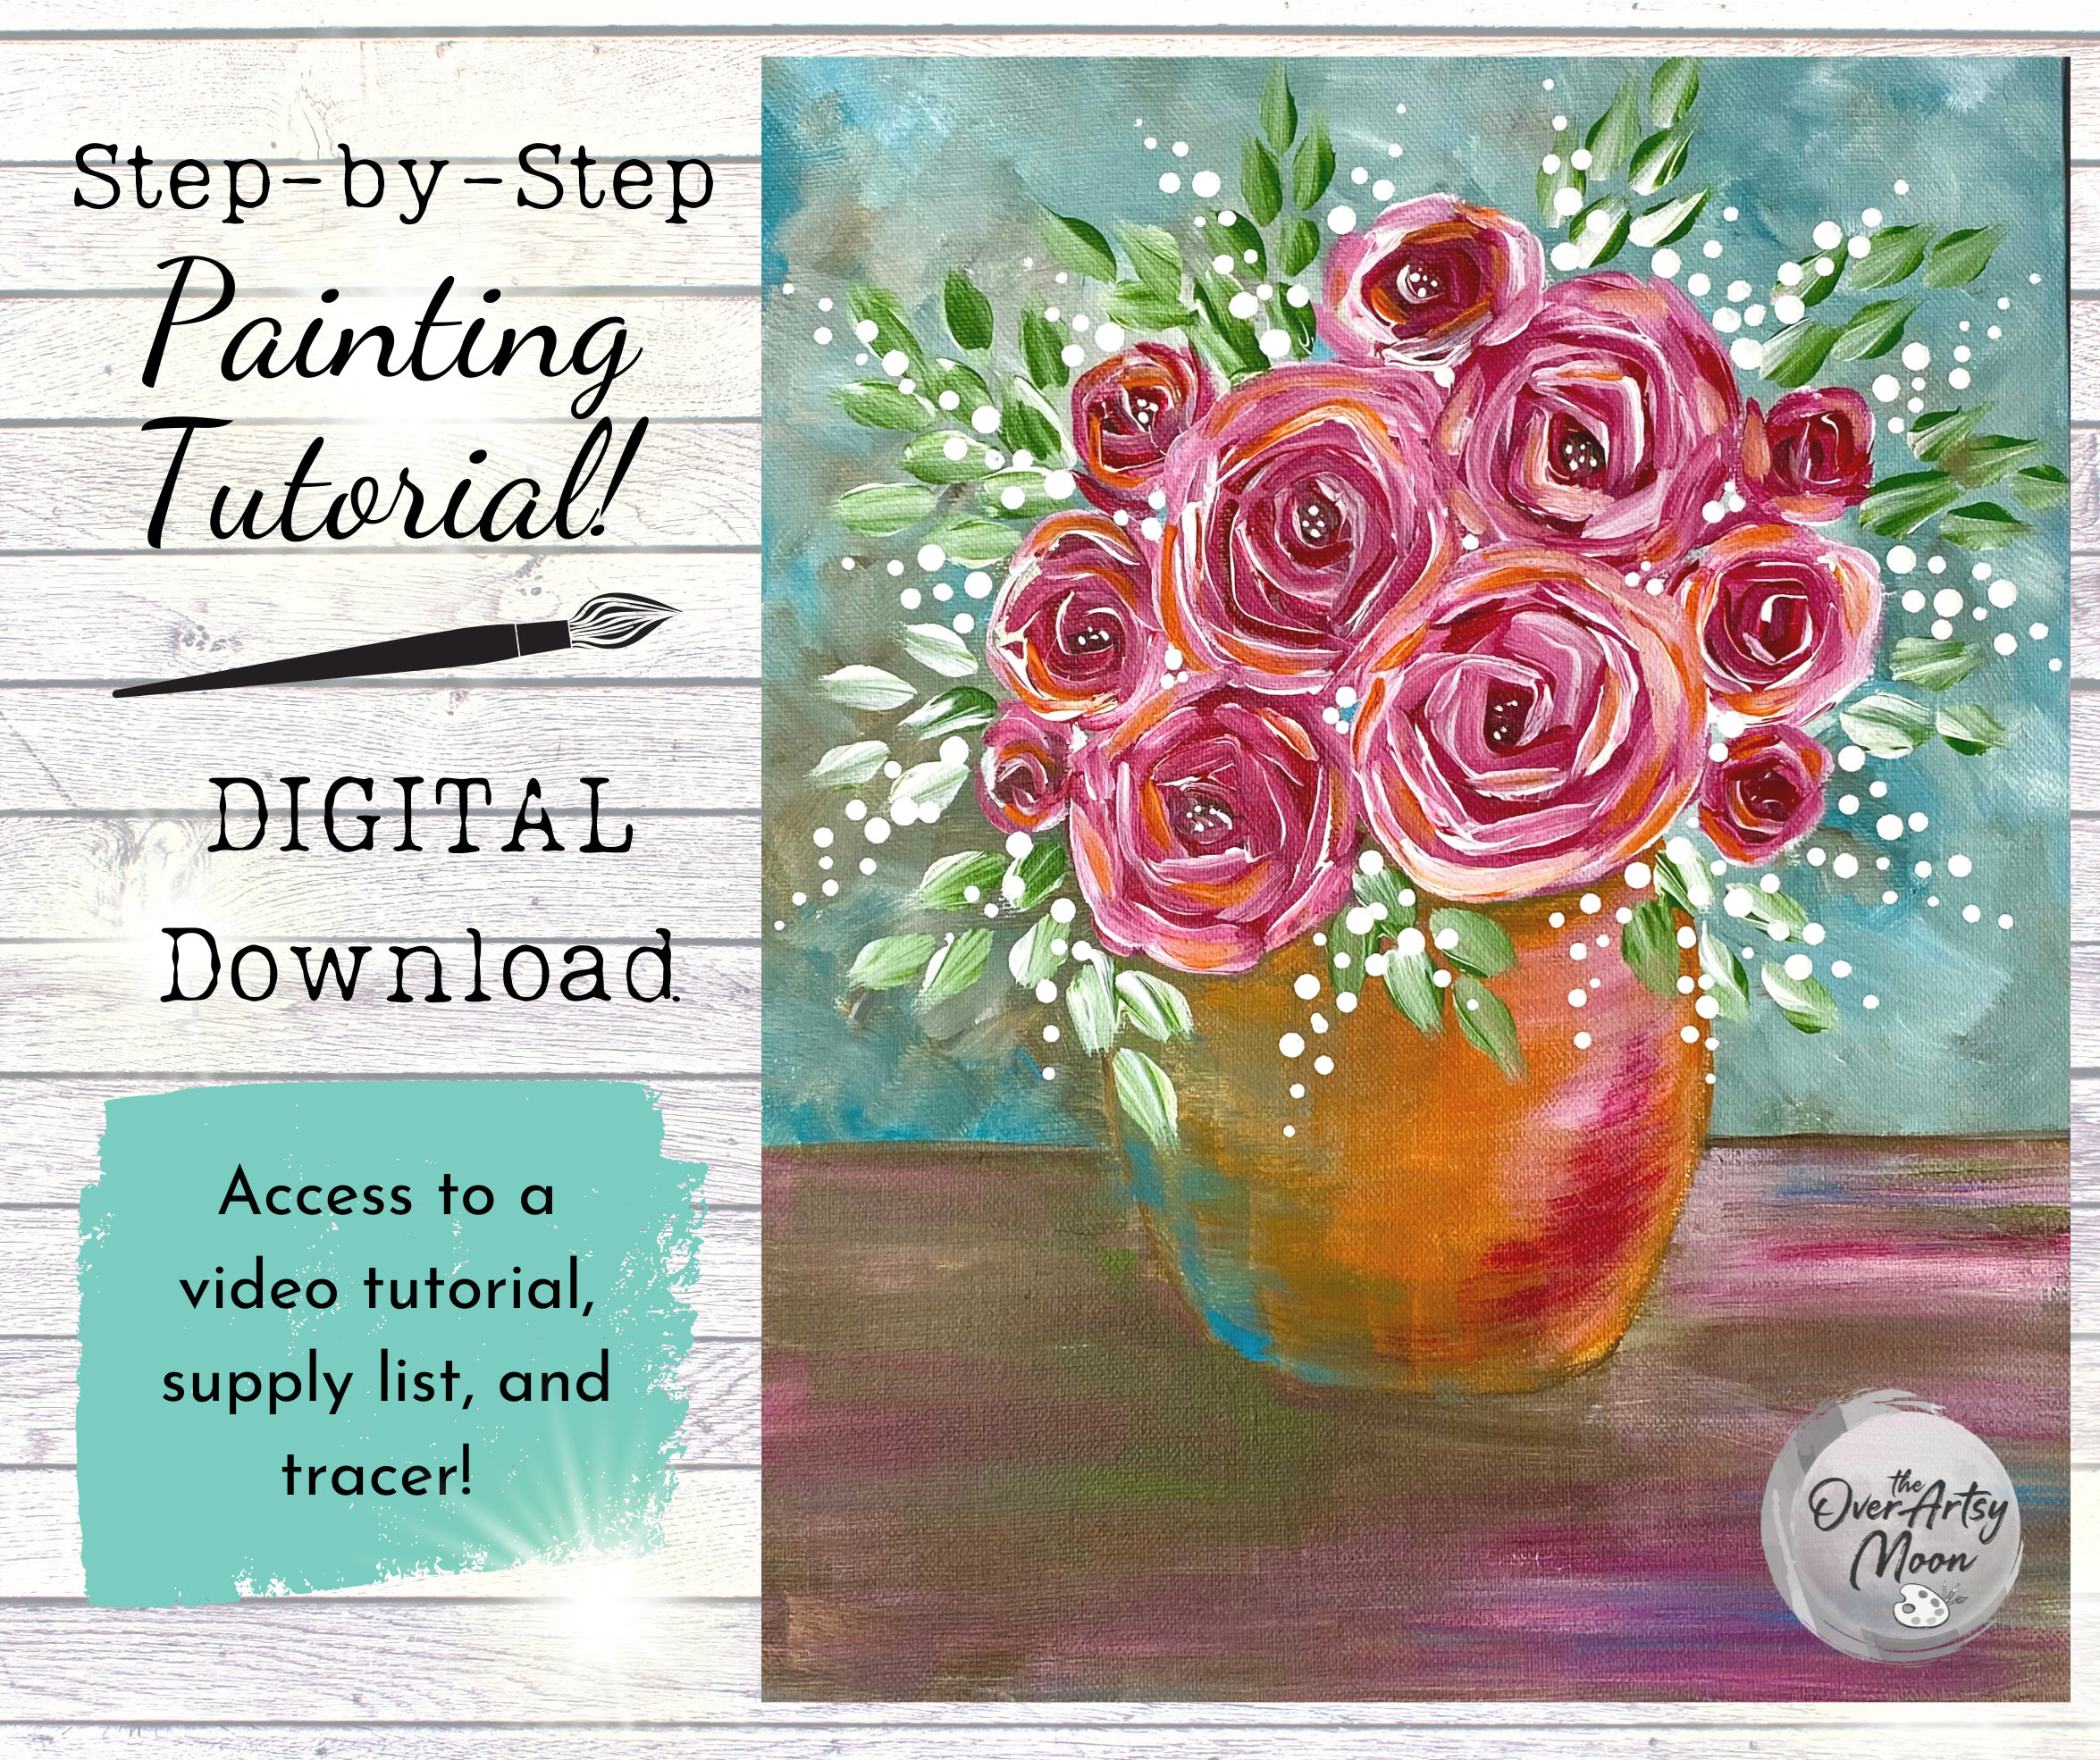 How to Paint a Rose in Acrylic — Online Art Lessons